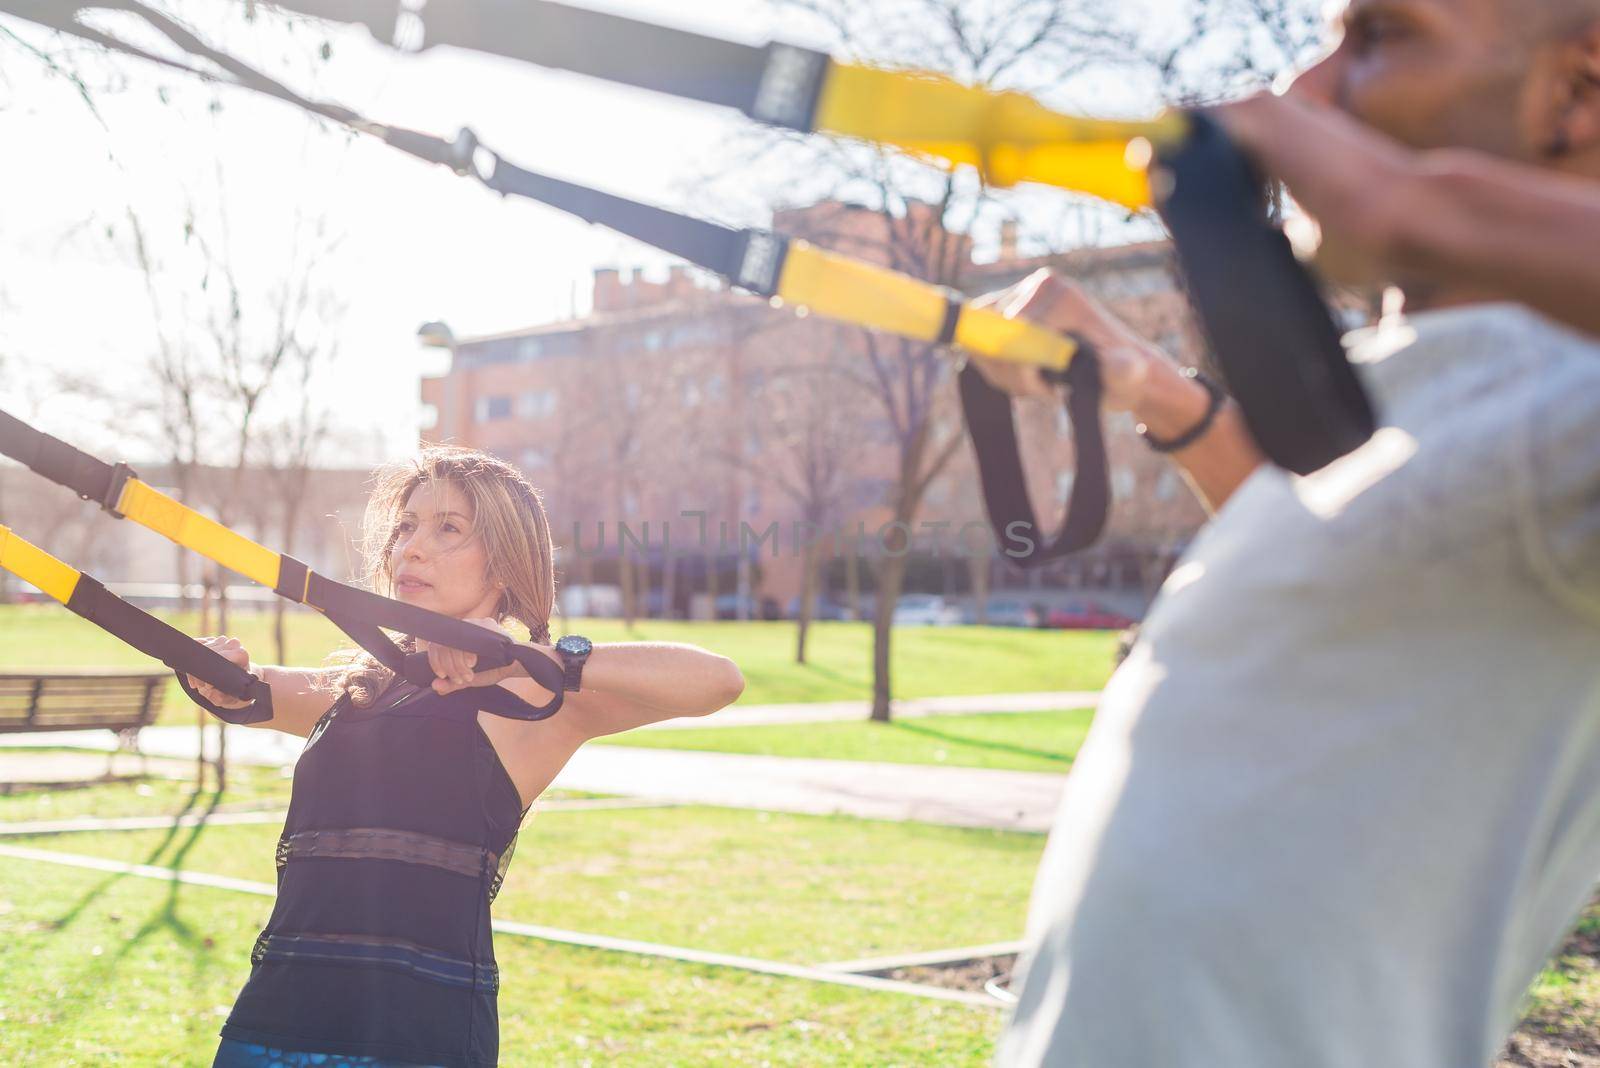 Fitness couple exercising with trx fitness straps in the park. Adult man and woman exercising outdoors.